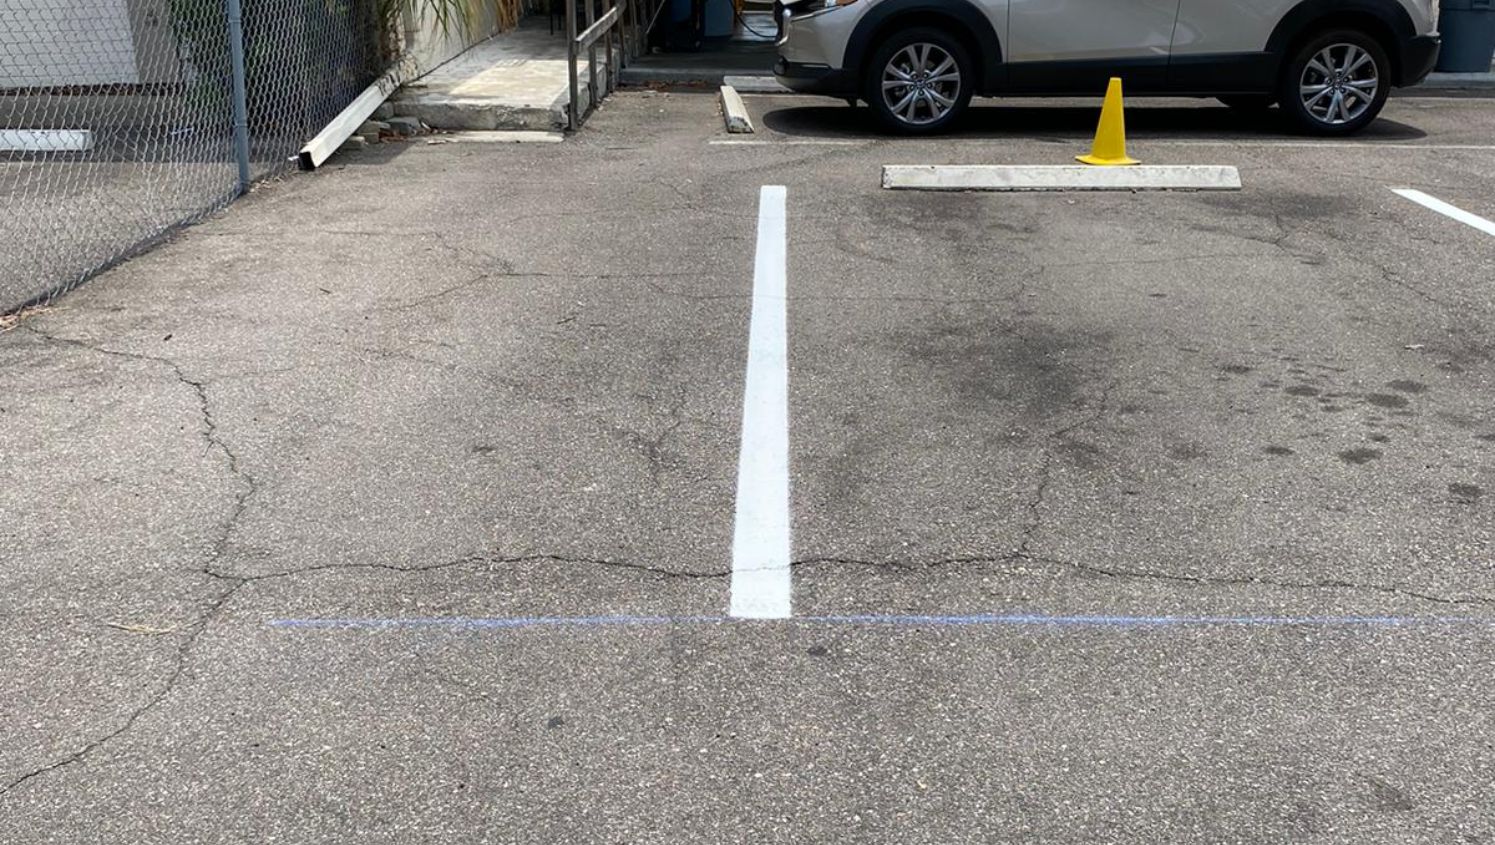 re-striped parking lot stall